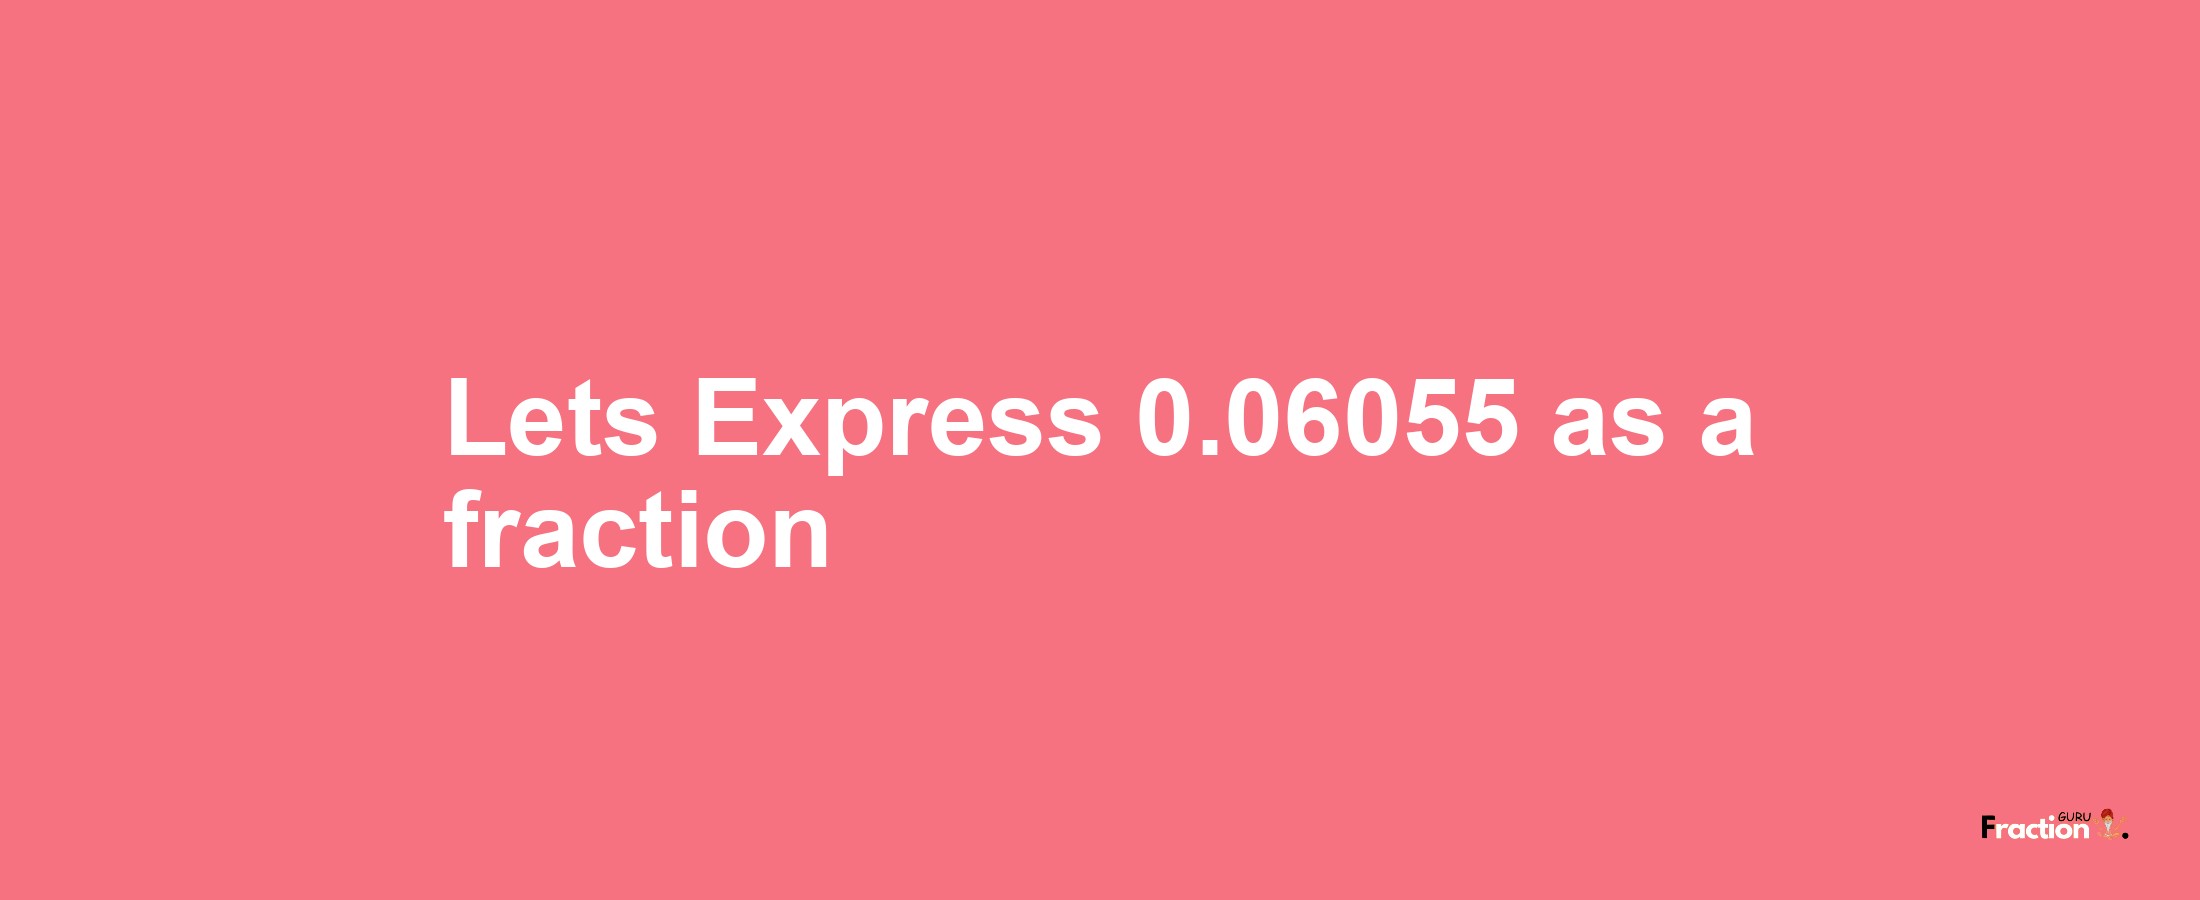 Lets Express 0.06055 as afraction